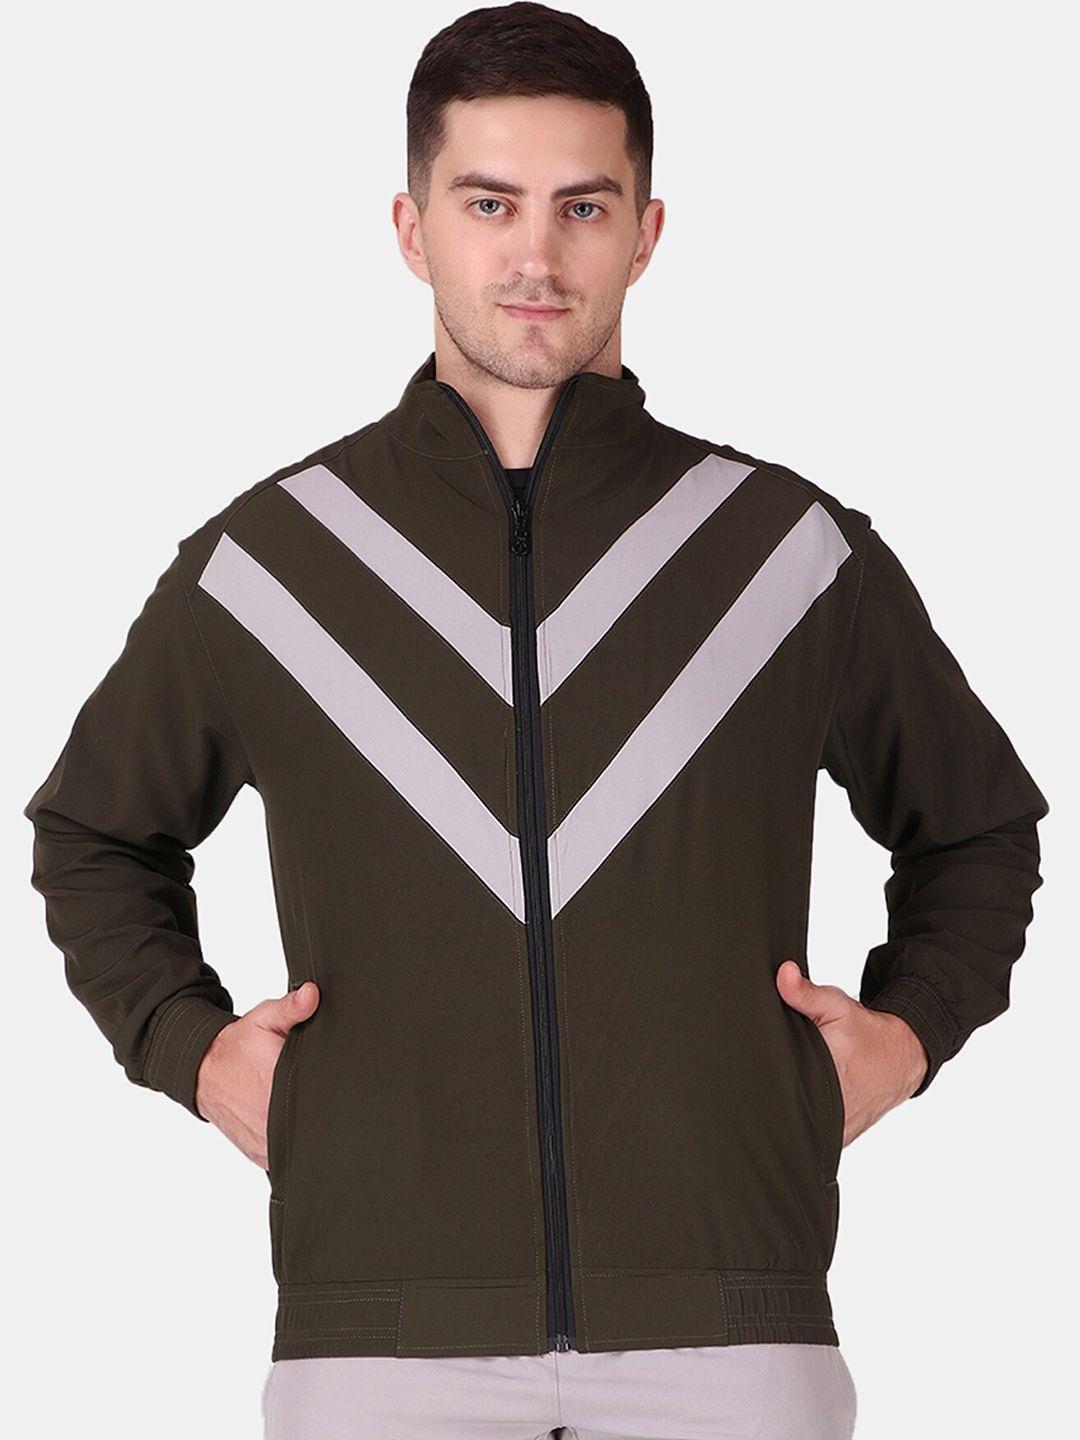 fitinc men olive green off white striped antimicrobial running sporty jacket